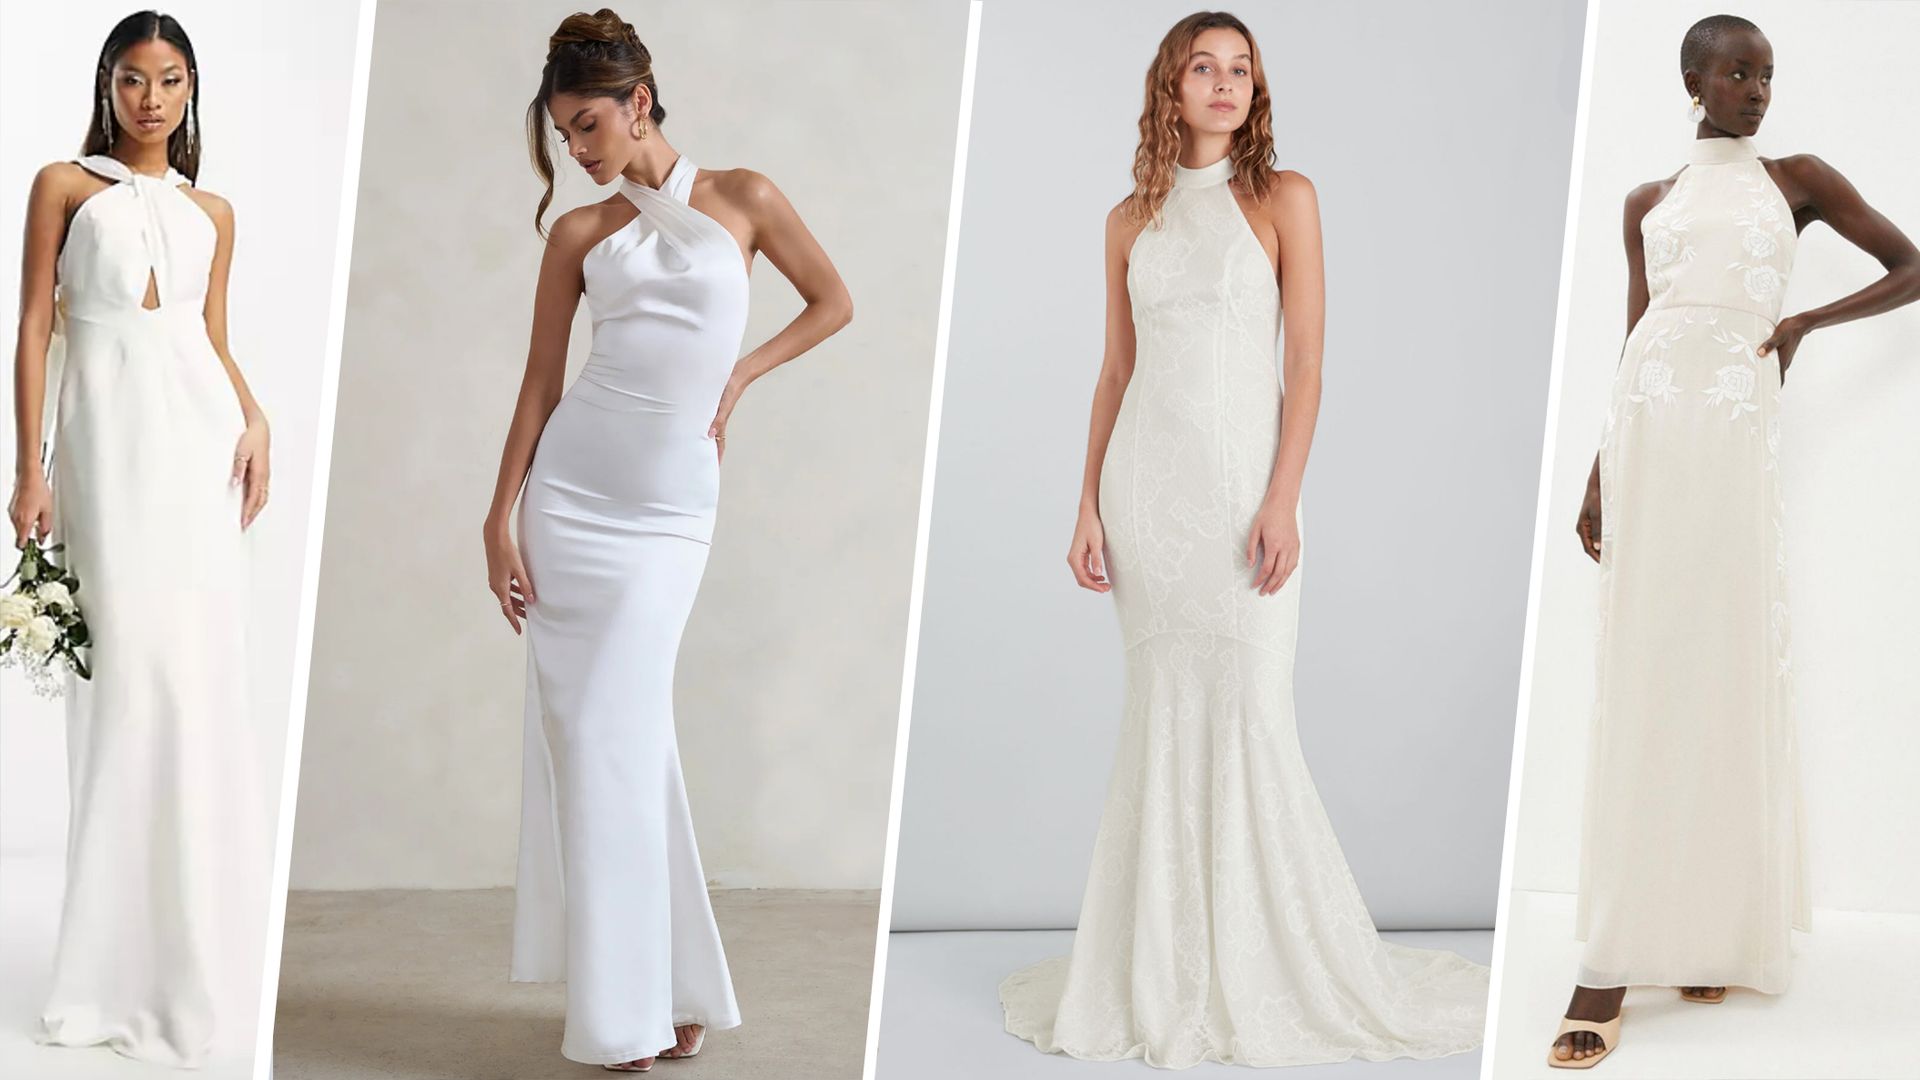 7 best halterneck wedding dresses if you're inspired by Sofia Richie